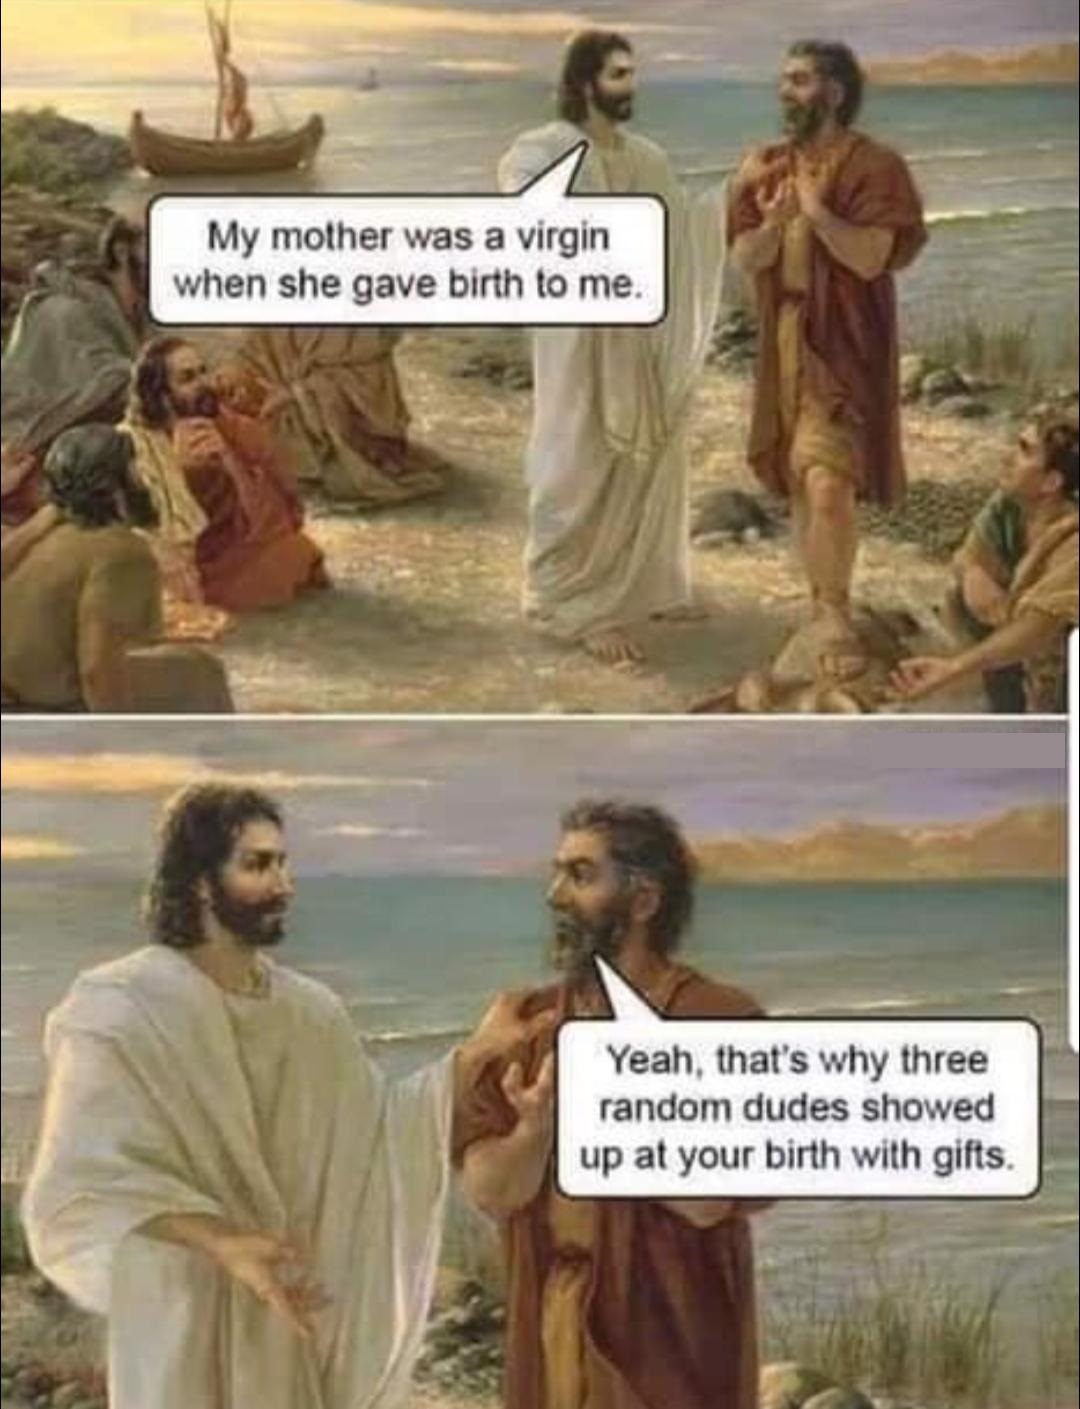 my mother was a virgin when she gave birth - My mother was a virgin when she gave birth to me. Yeah, that's why three random dudes showed up at your birth with gifts.